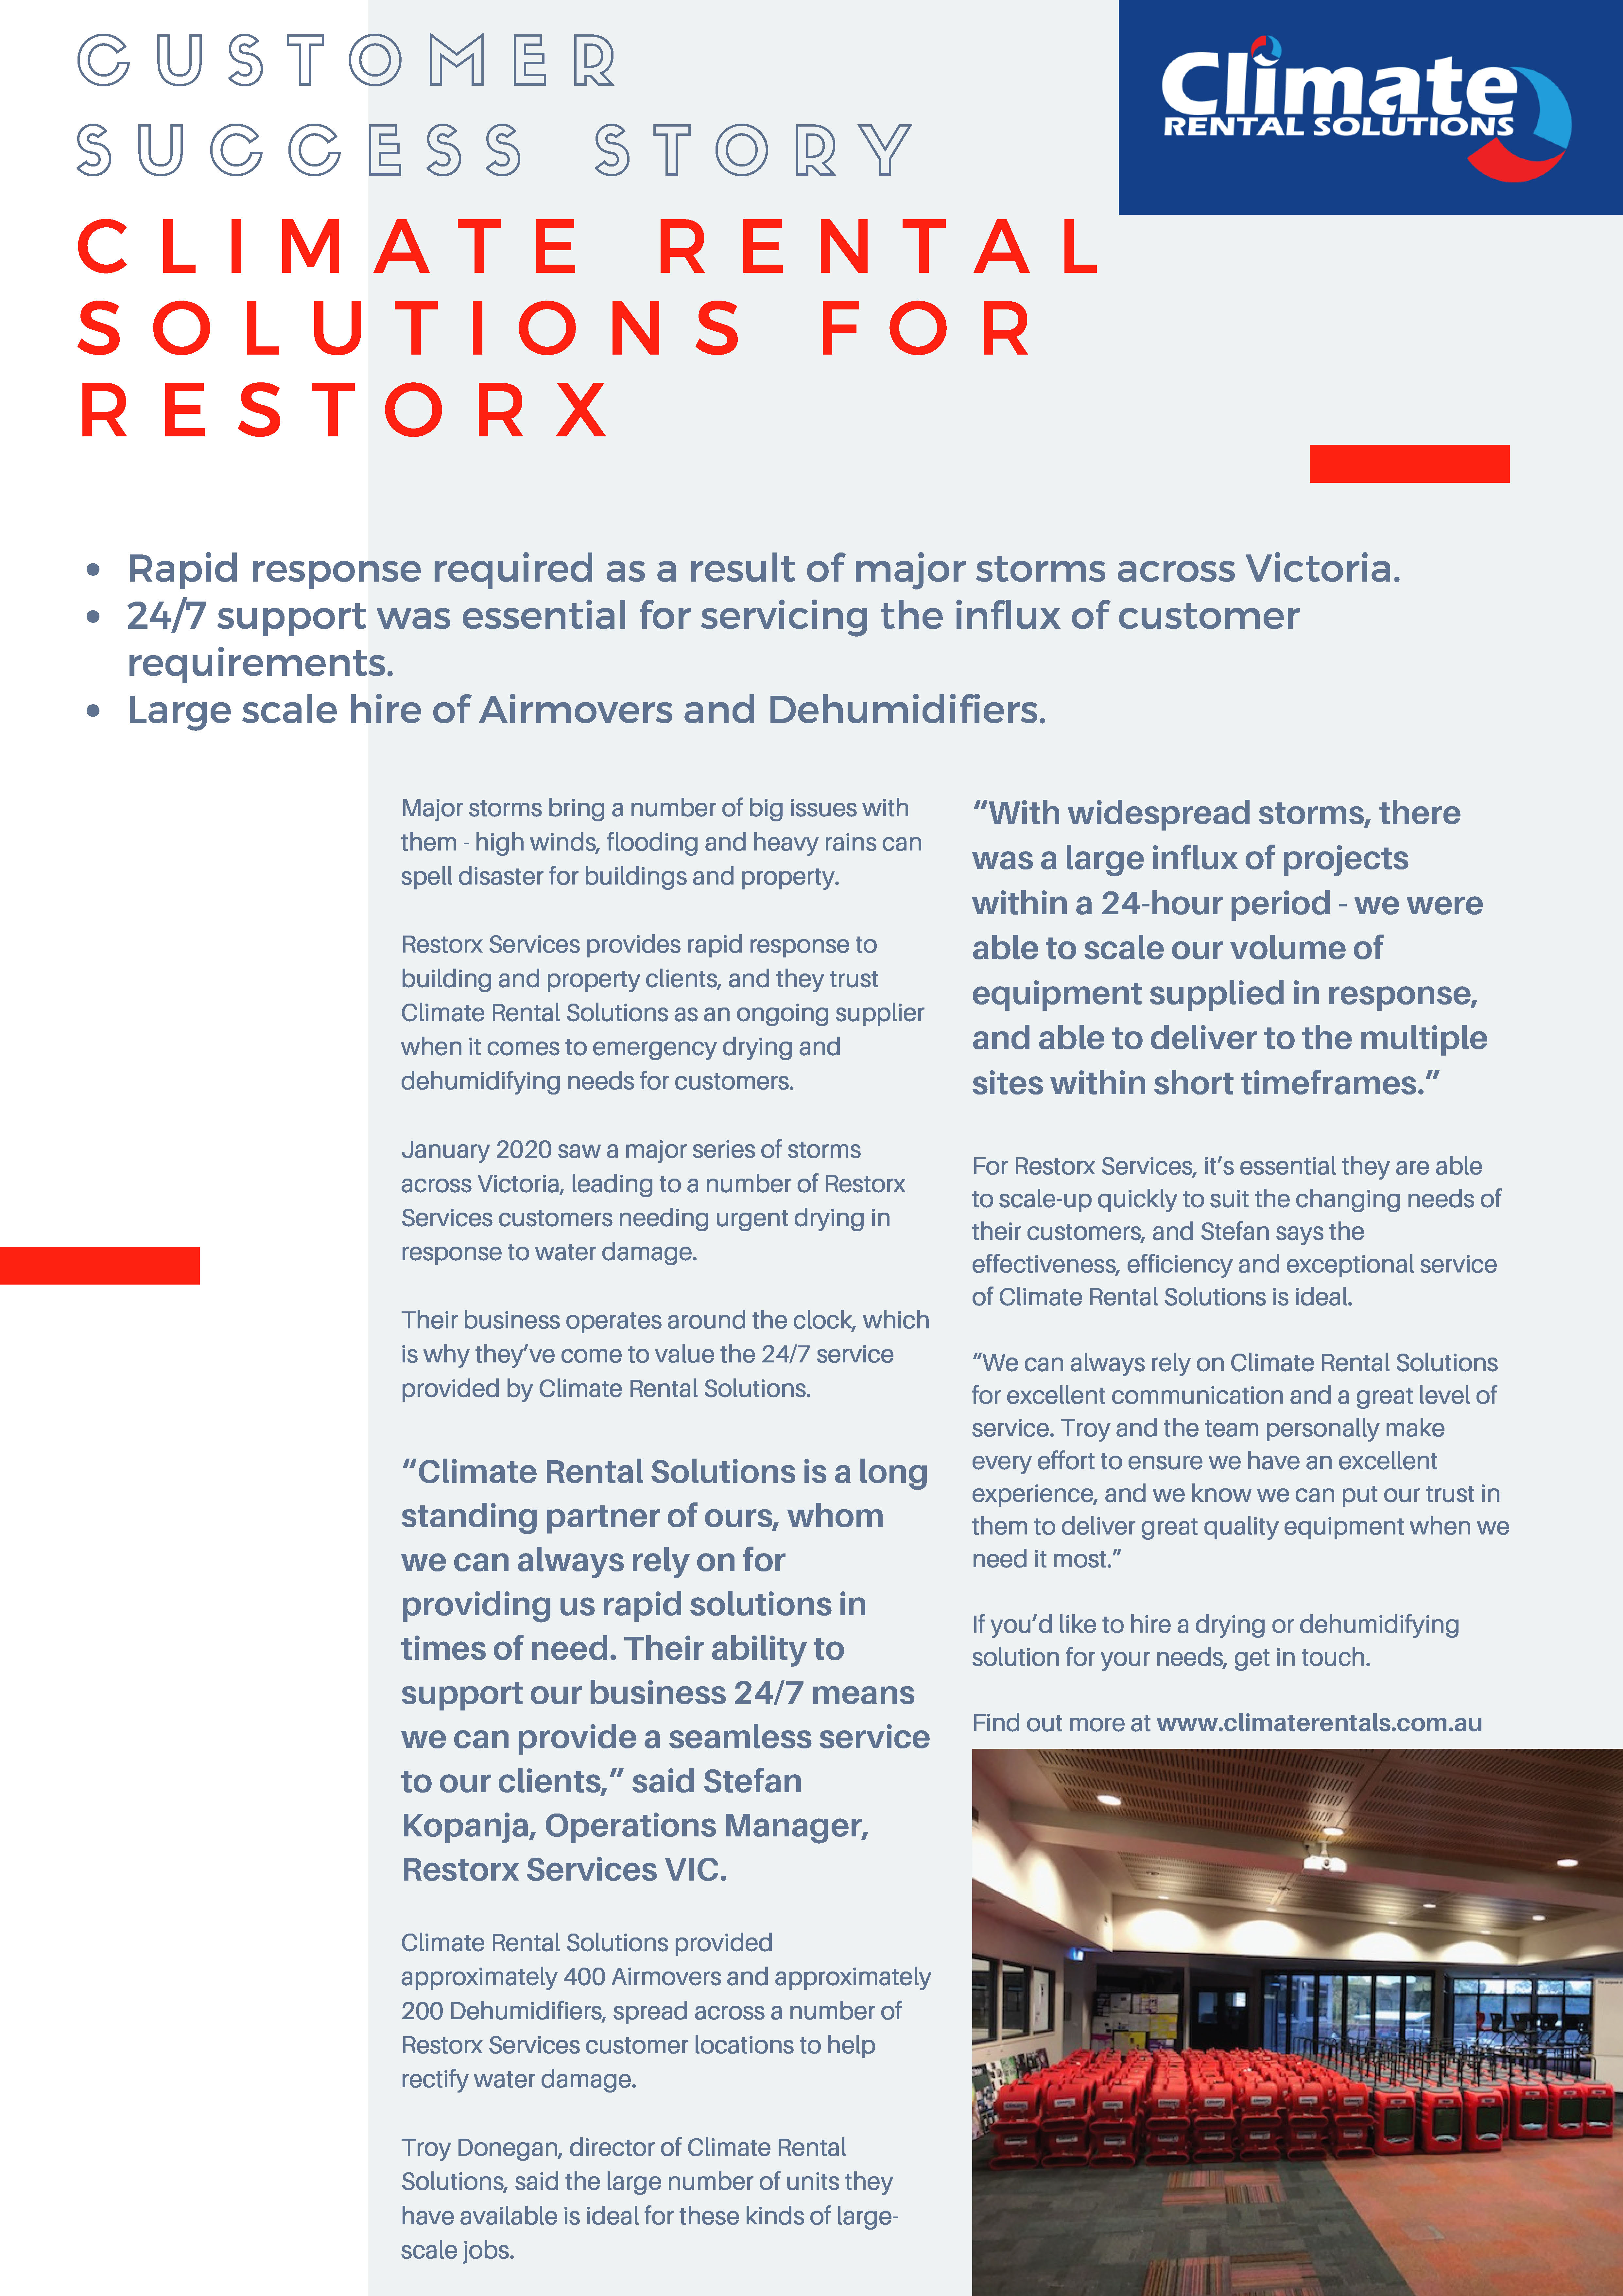 Restorx and Climate Rental Solutions[2]